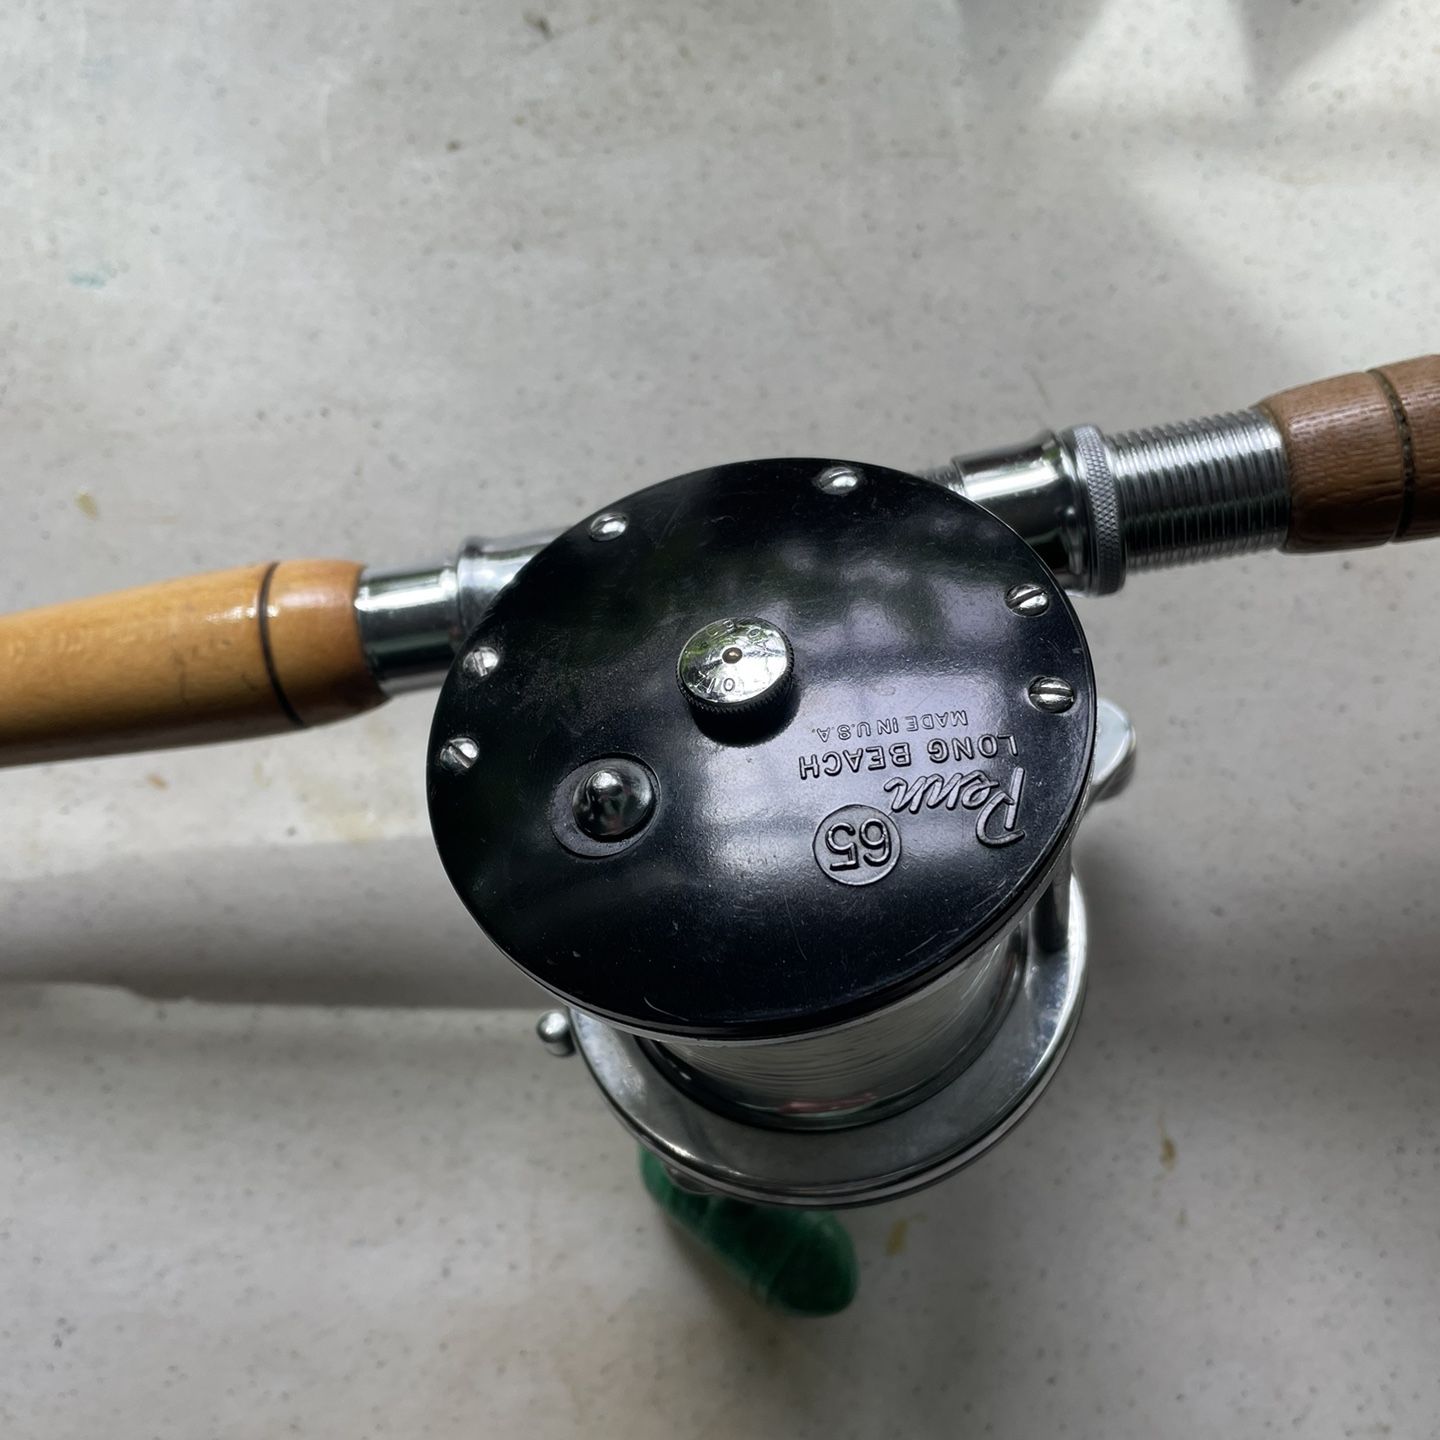 Penn Reel And Boat Rod